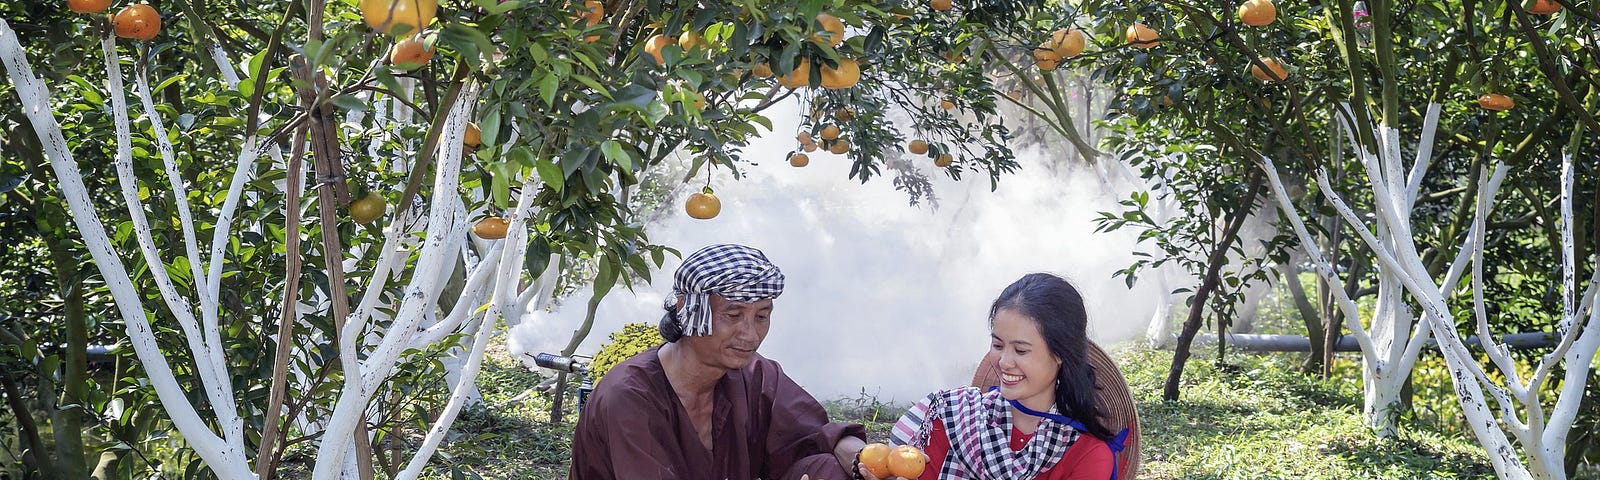 Two people sit on the ground in an orchard. Tangerine trees arch over their heads. Their hands and two baskets on the ground are full of tangerines.